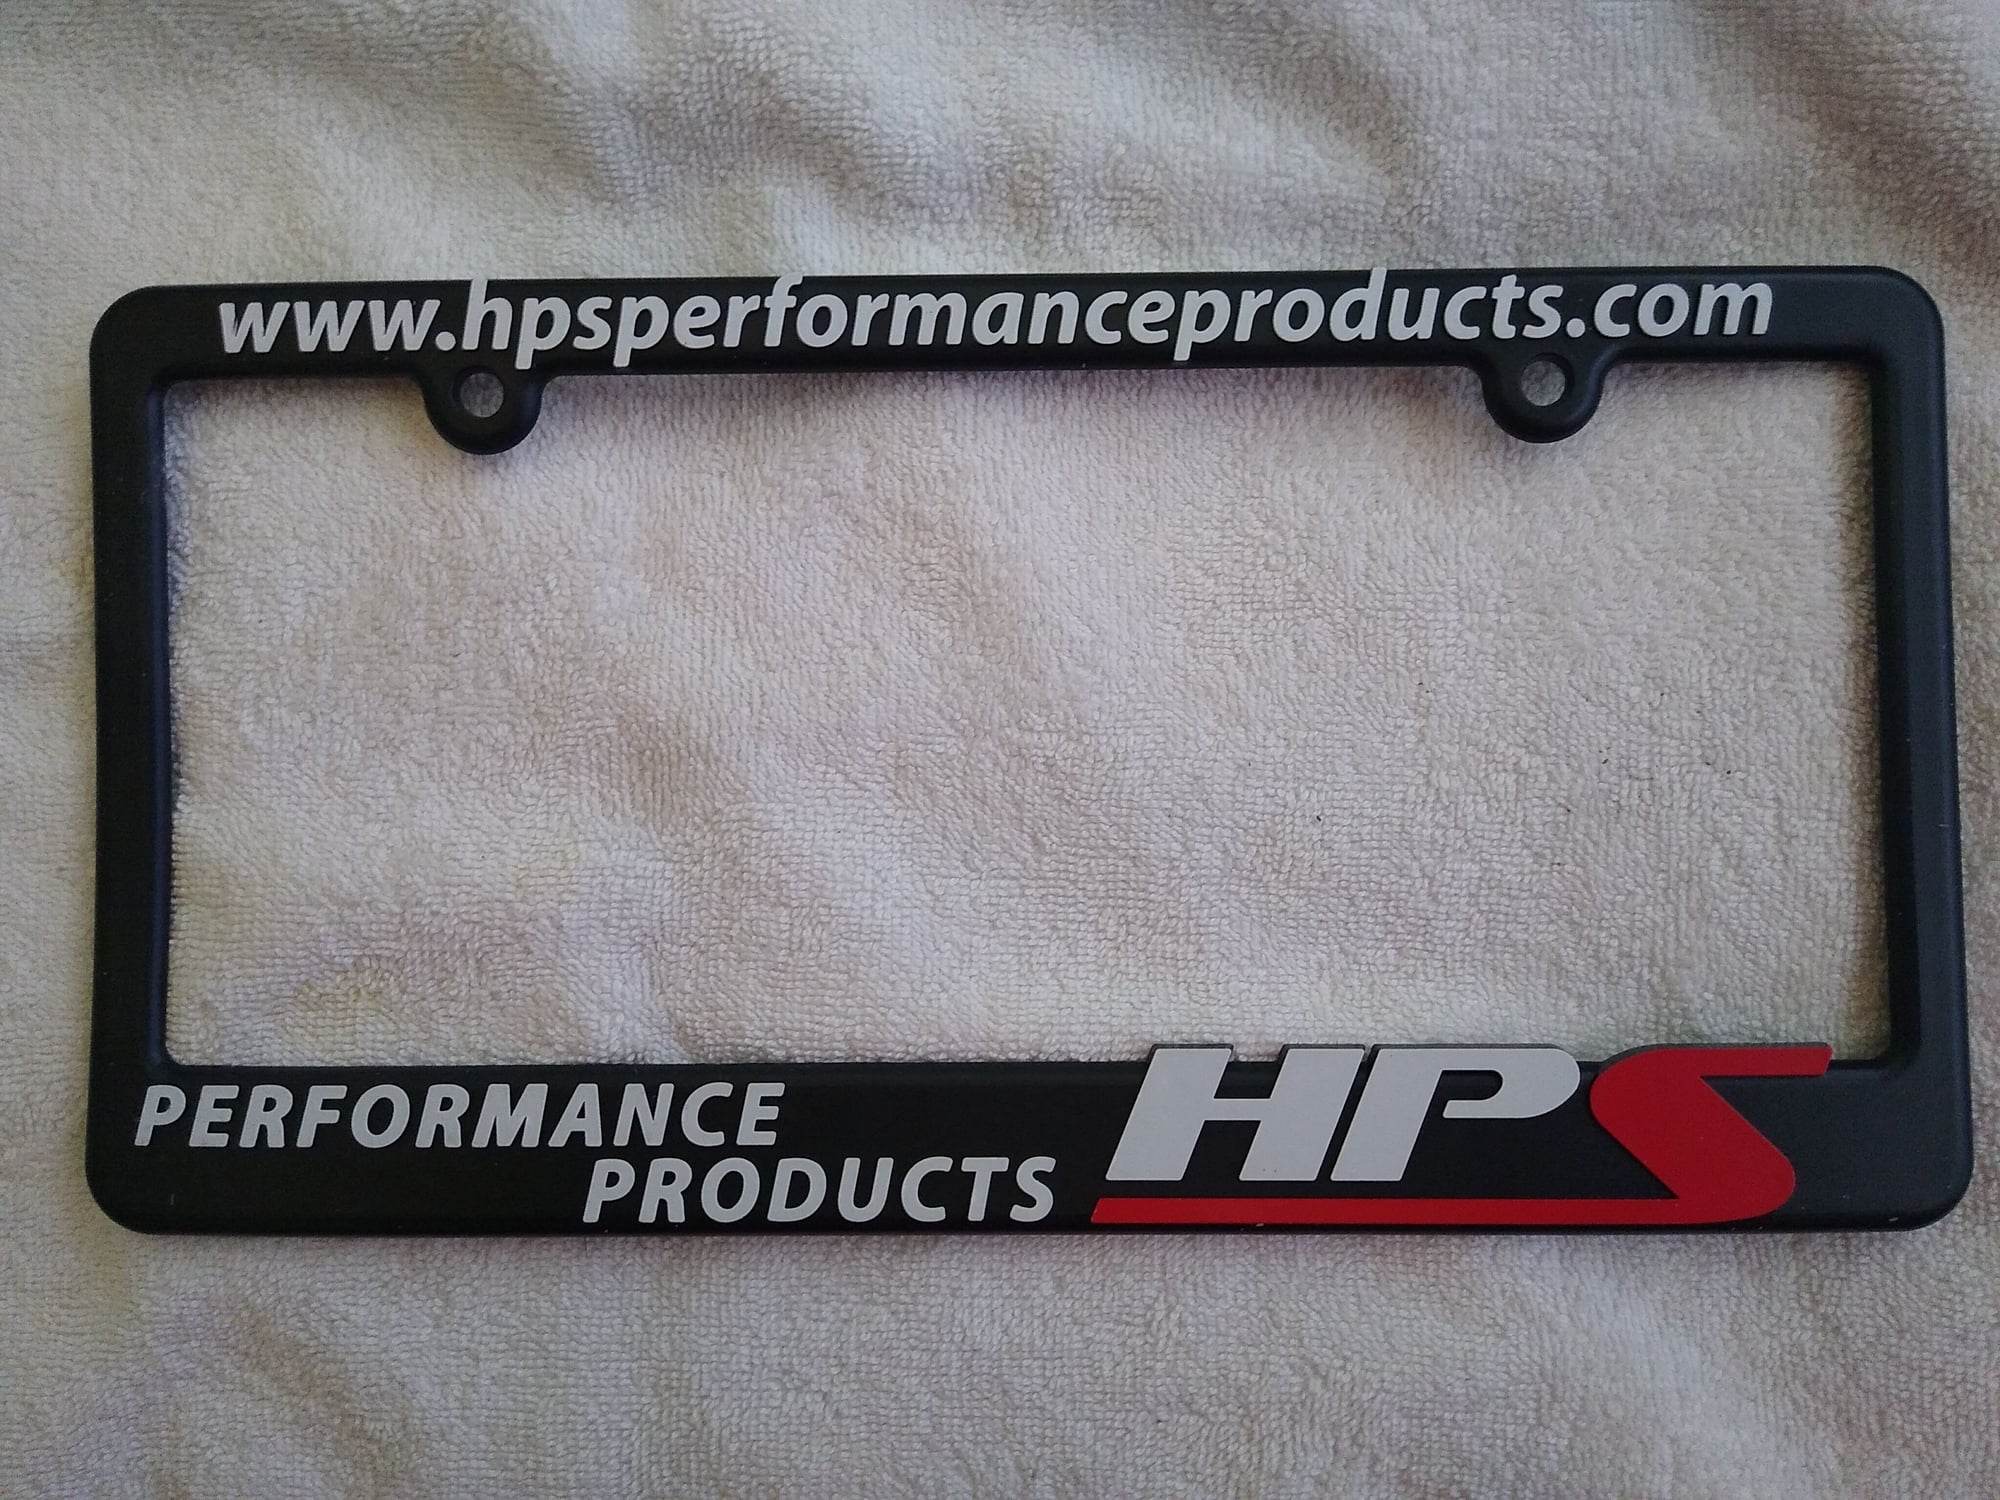 Miscellaneous - HPS License Plate Frame - New - All Years Any Make All Models - San Jose, CA 95121, United States